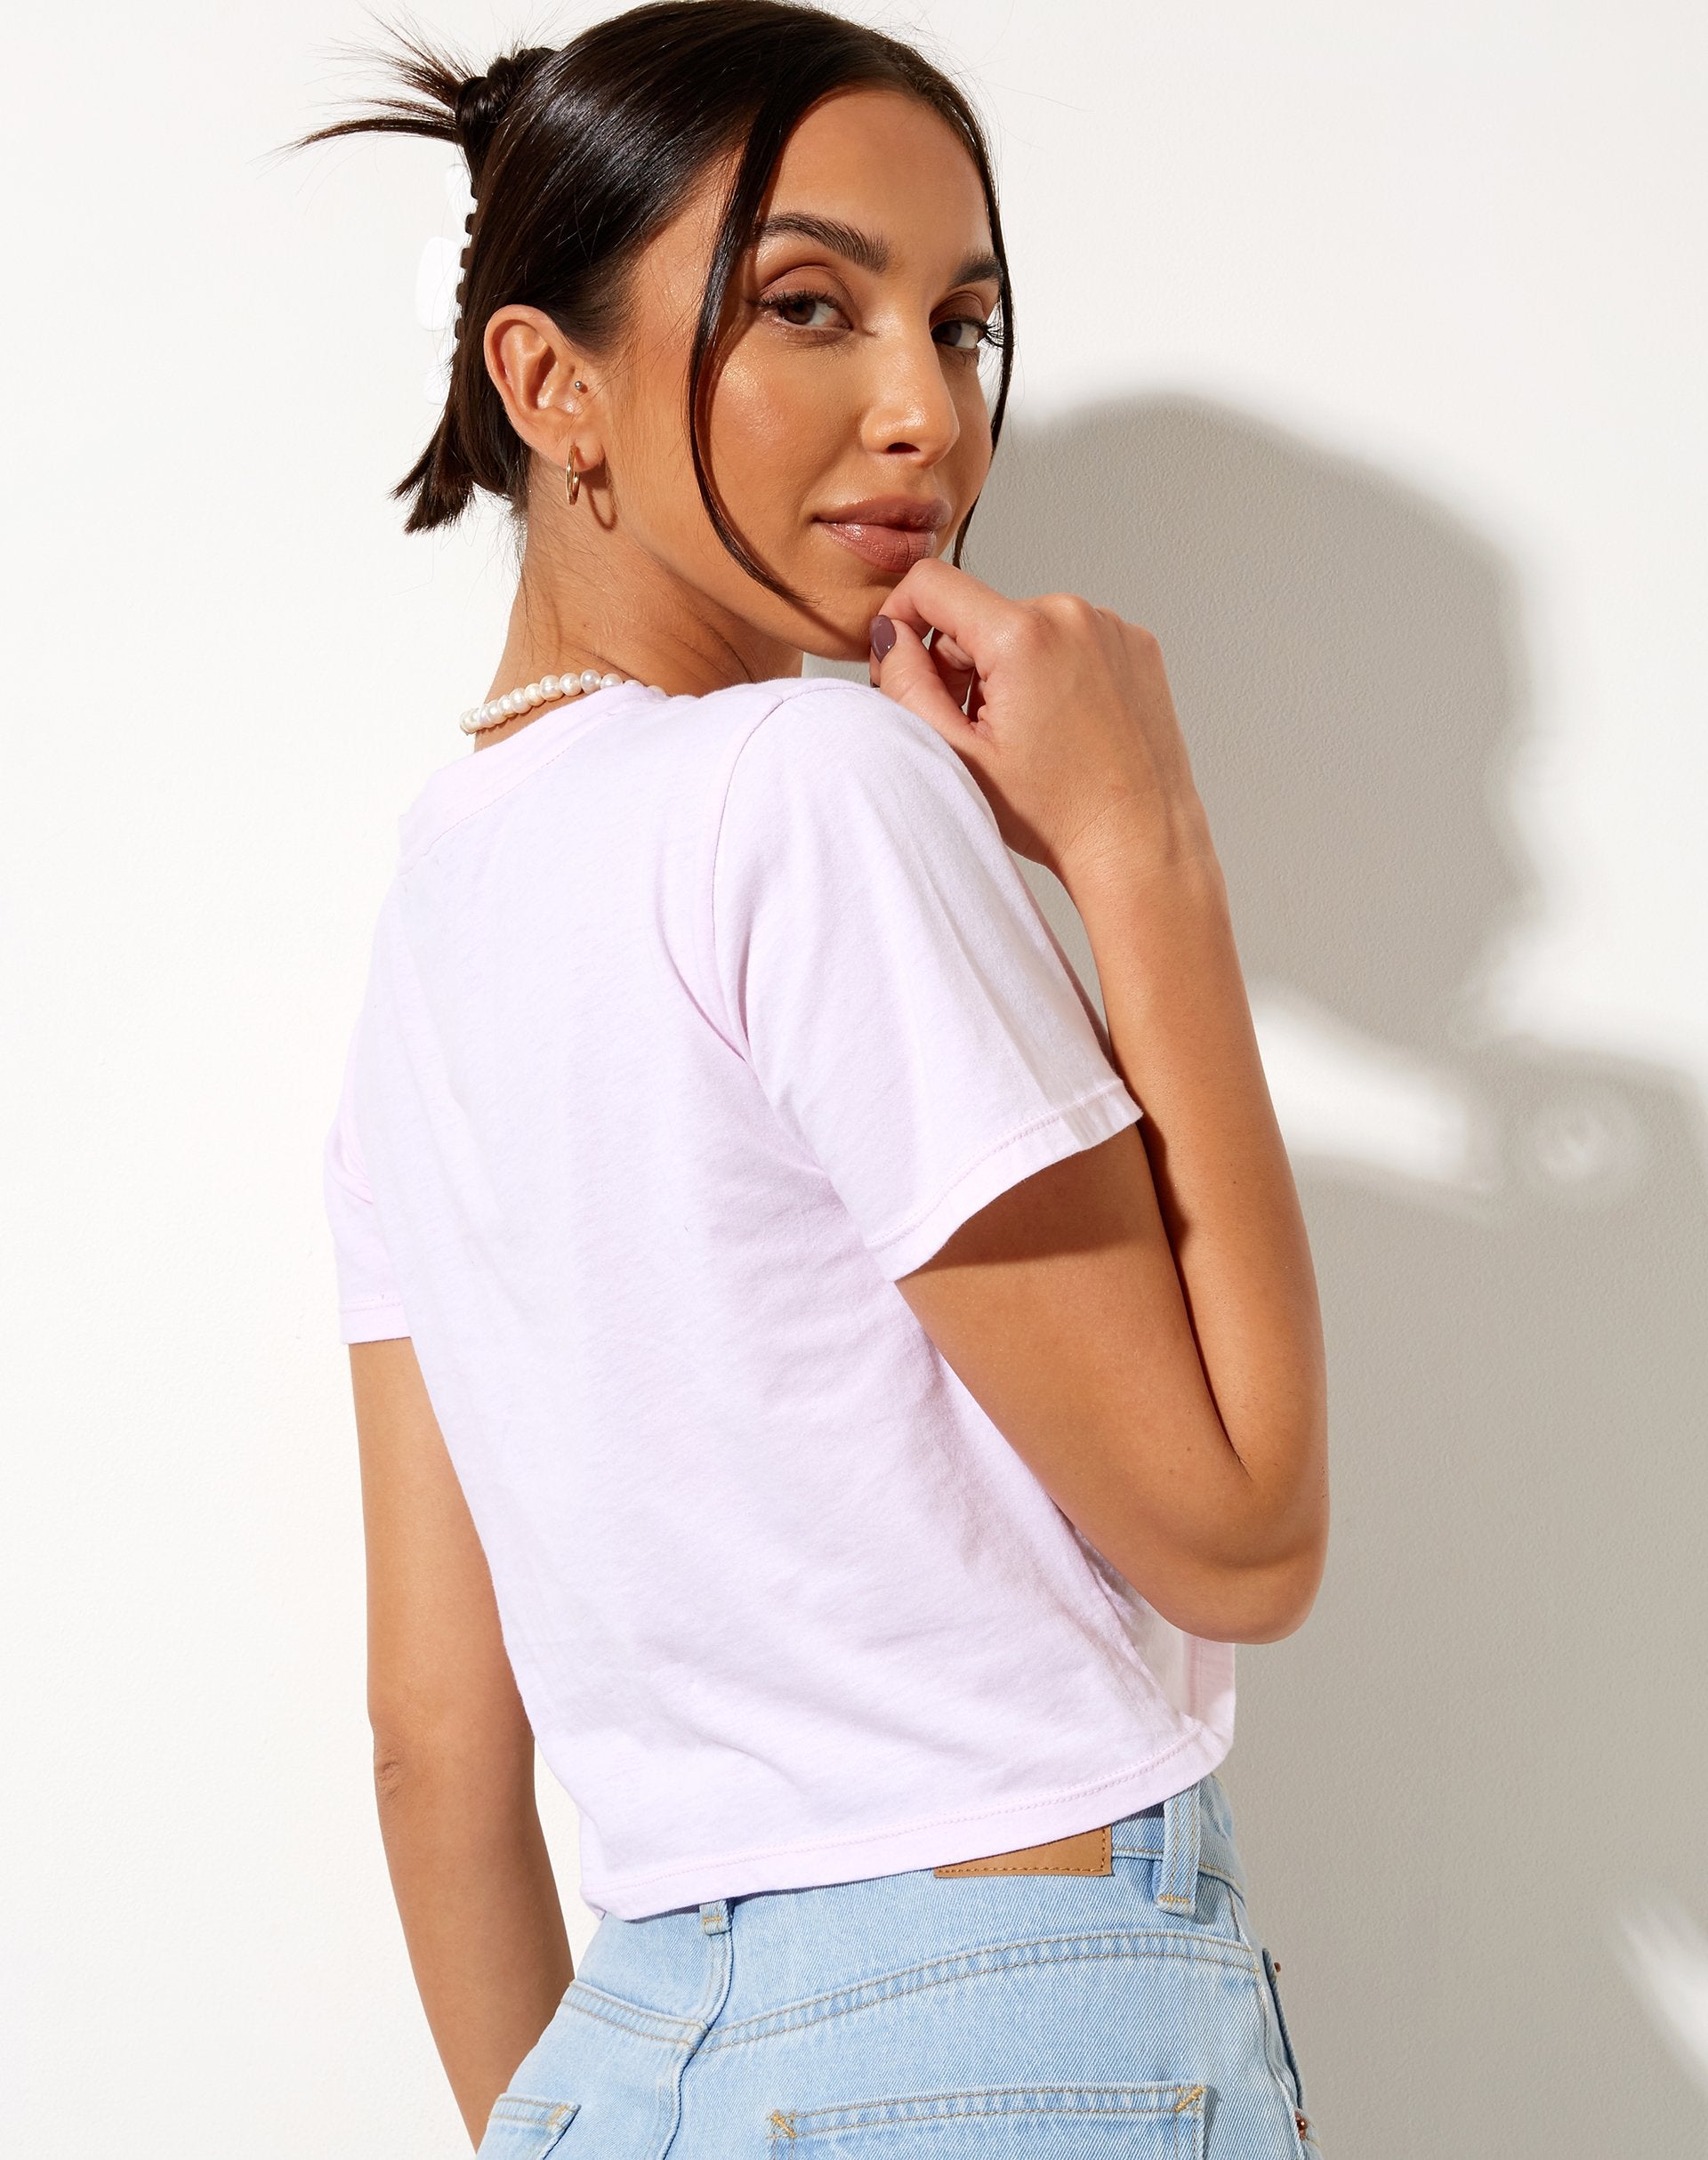 Image of Shrunk Tee in Baby Pink Paradise Dolphin